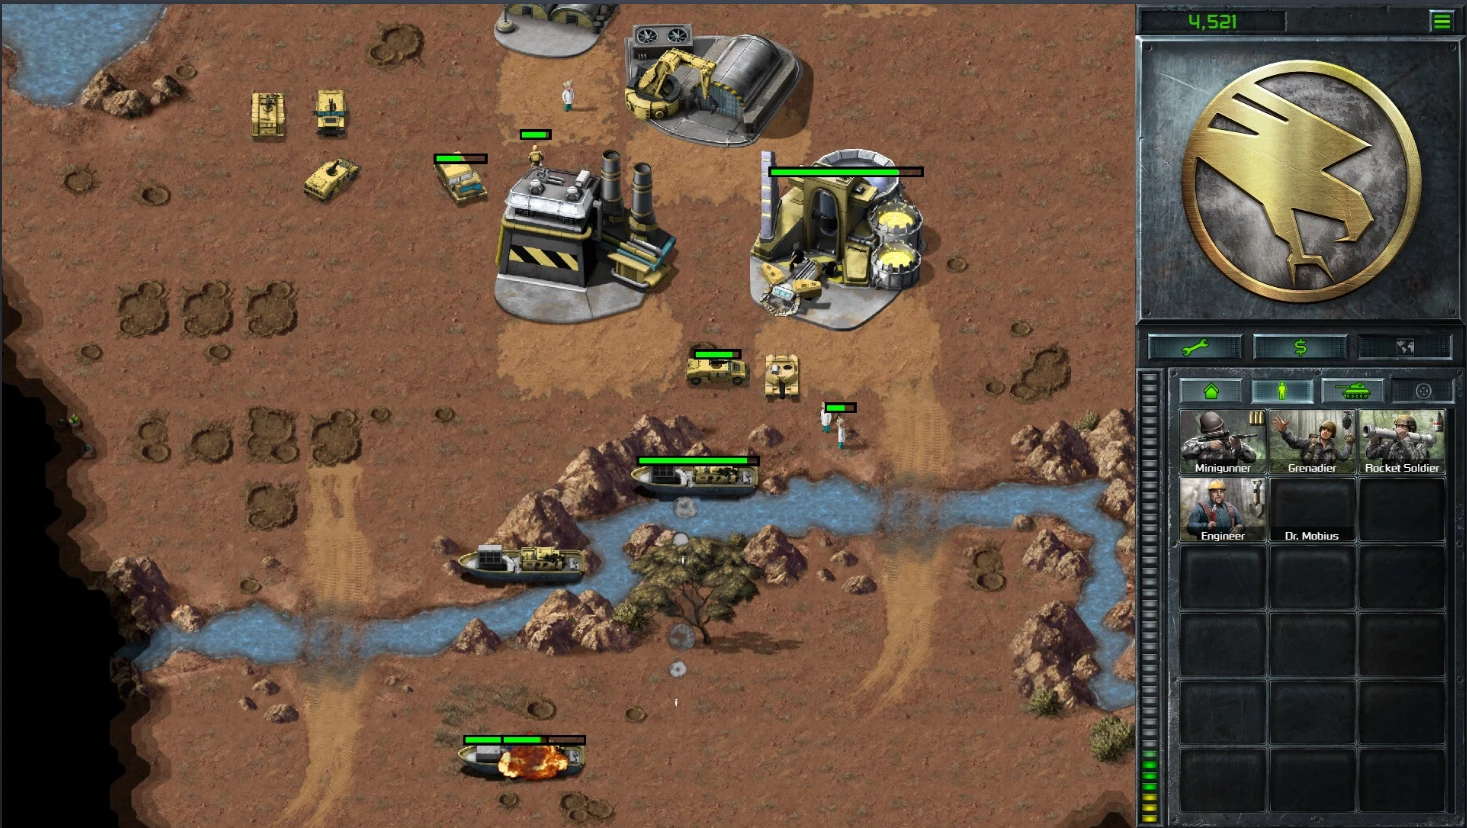 Command and conquer remastered. Red Alert 2 ремастер. Command & Conquer Remastered collection. Command Conquer 2 Remastered collection. Command Conquer Red Alert 2 Remastered.